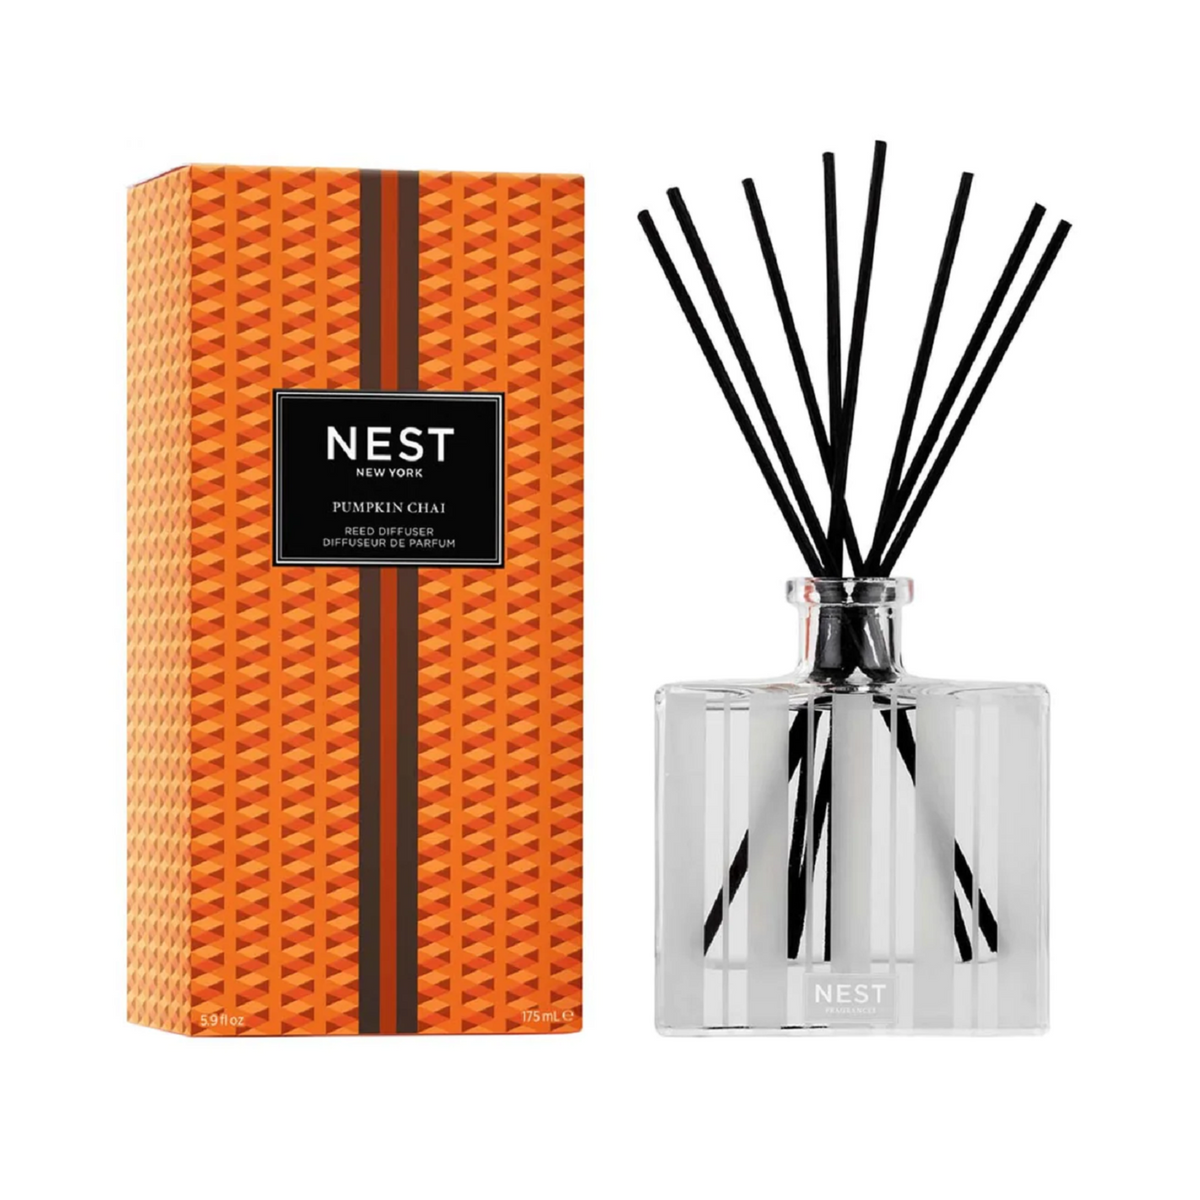 Product Image of Nest New York Pumpkin Chai Reed Diffuser with Box